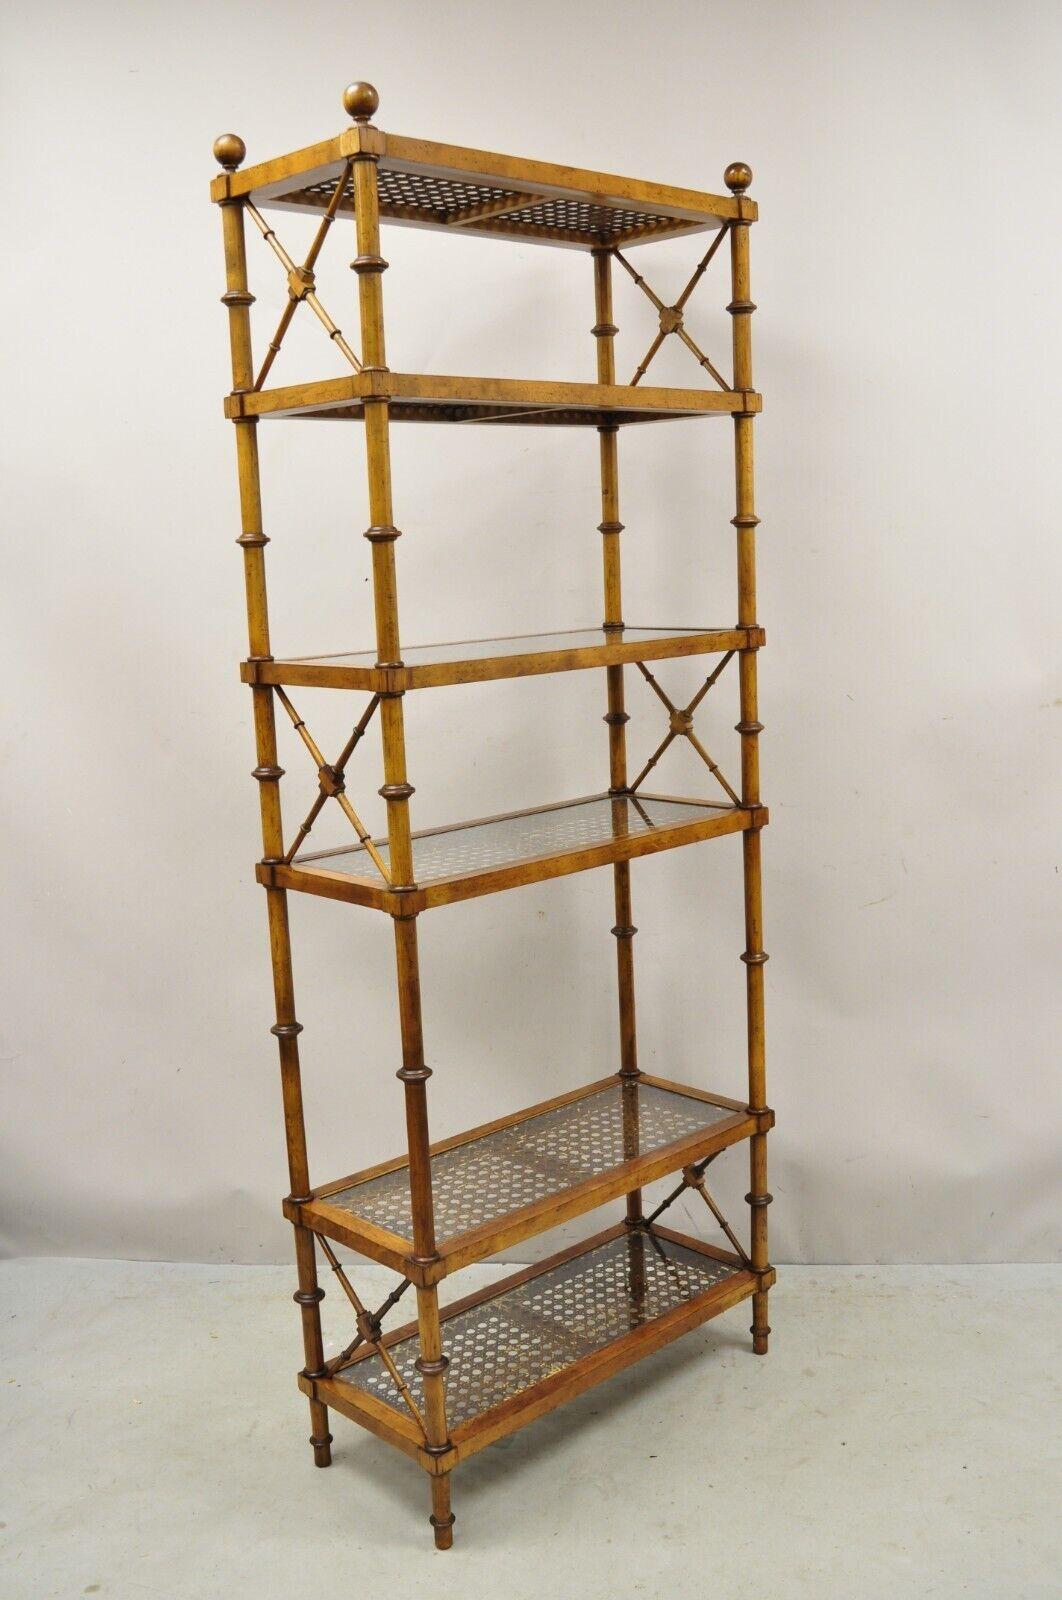 Vintage Hollywood Regency Faux Bamboo Wood & Cane 6 Tier Bookcase Etagere - Pair. Item features 6 tiers with cane and glass surface, x-form faux bamboo design, very nice vintage item, quality American craftsmanship, great style and form.  
Circa Mid